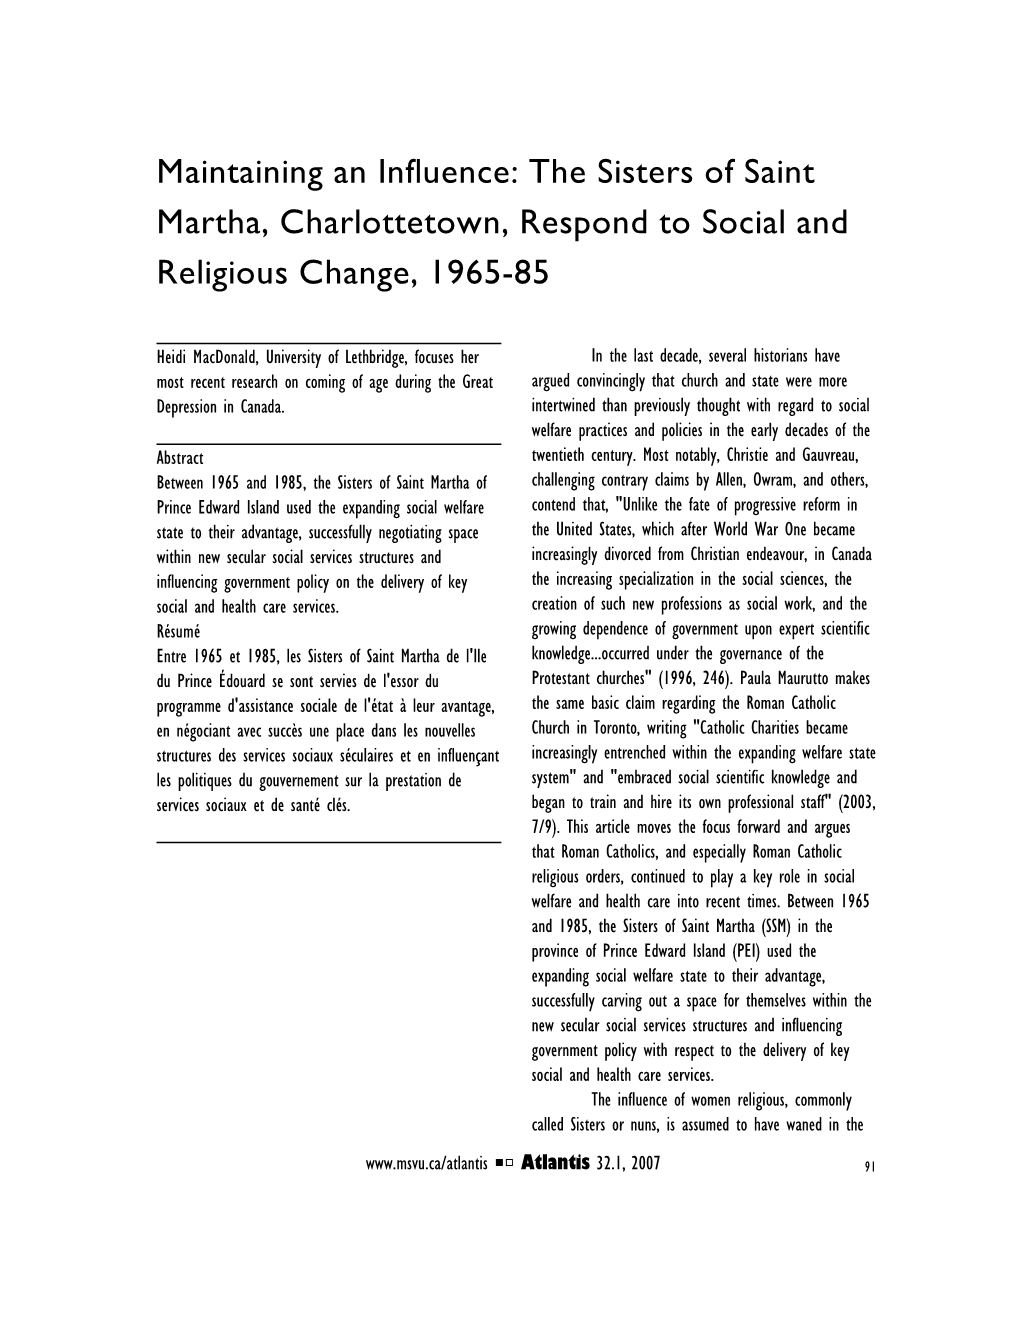 The Sisters of Saint Martha, Charlottetown, Respond to Social and Religious Change, 1965-85